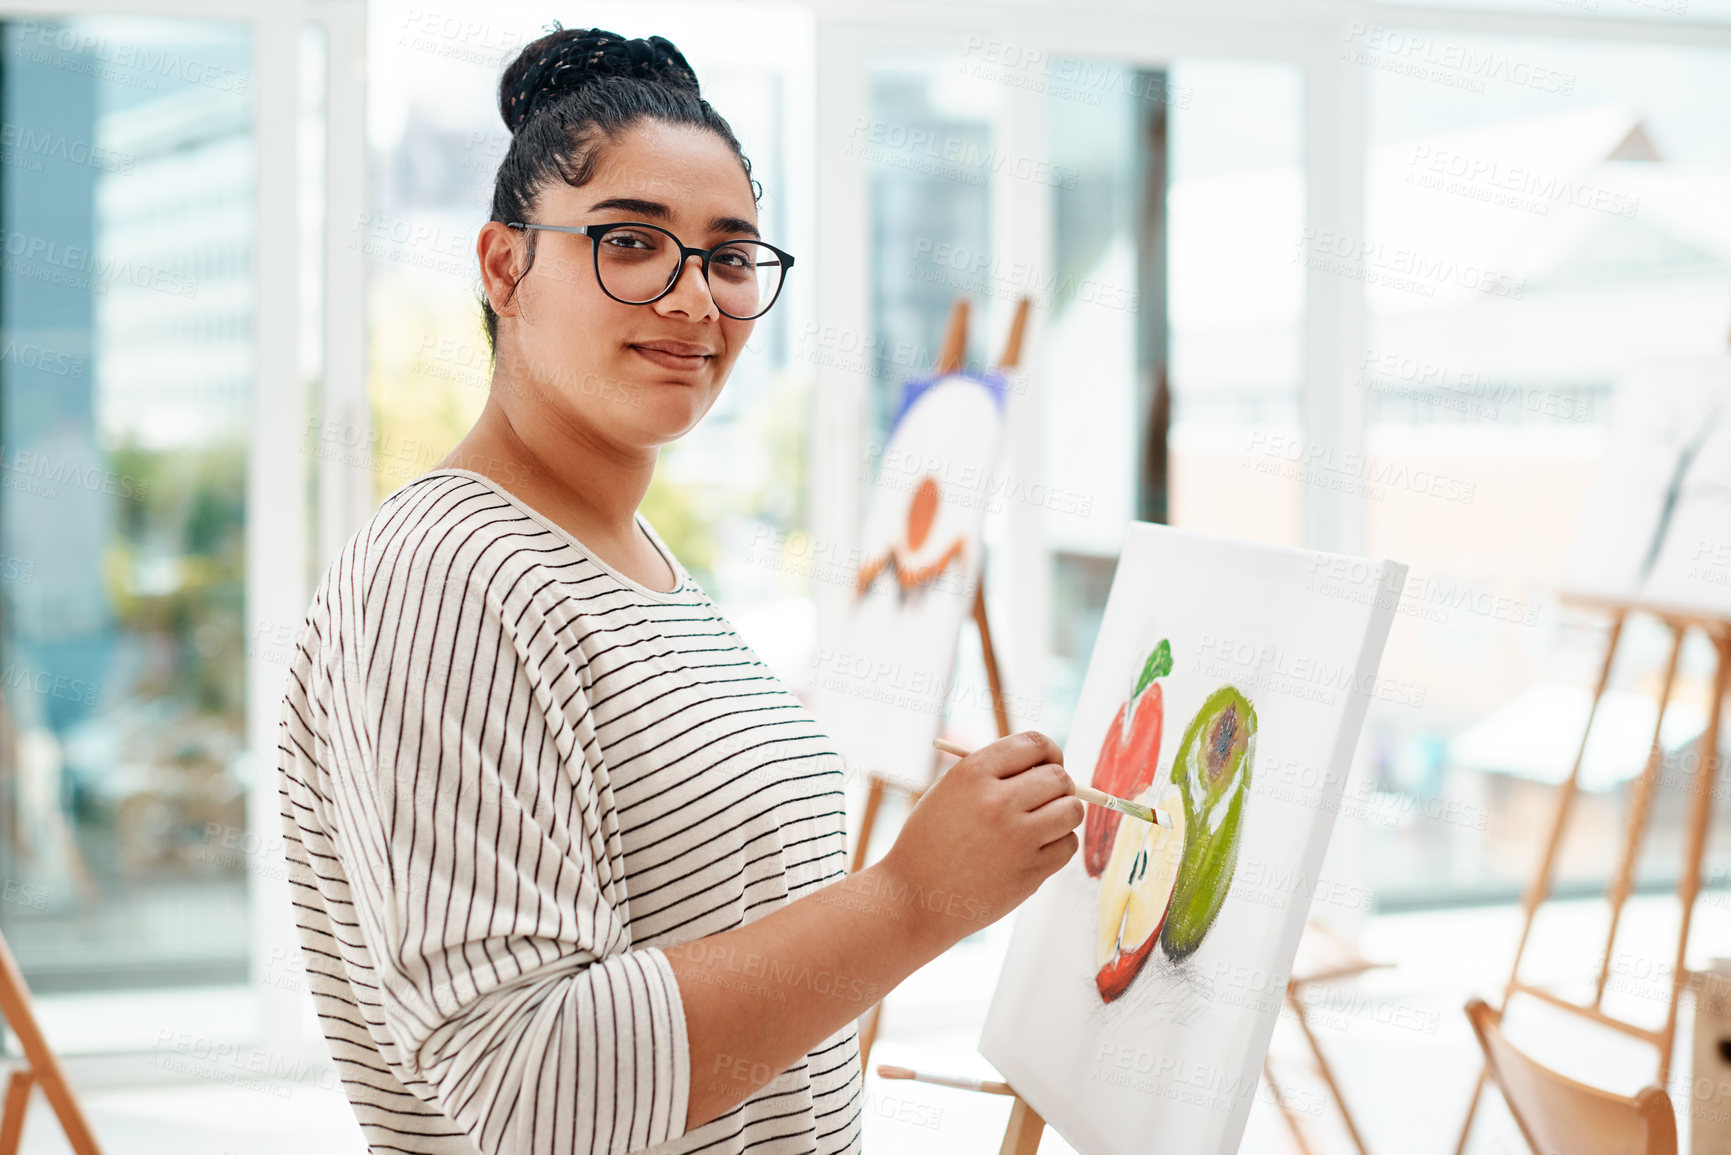 Buy stock photo Cropped portrait of an attractive young artist standing alone and painting during an art class in the studio